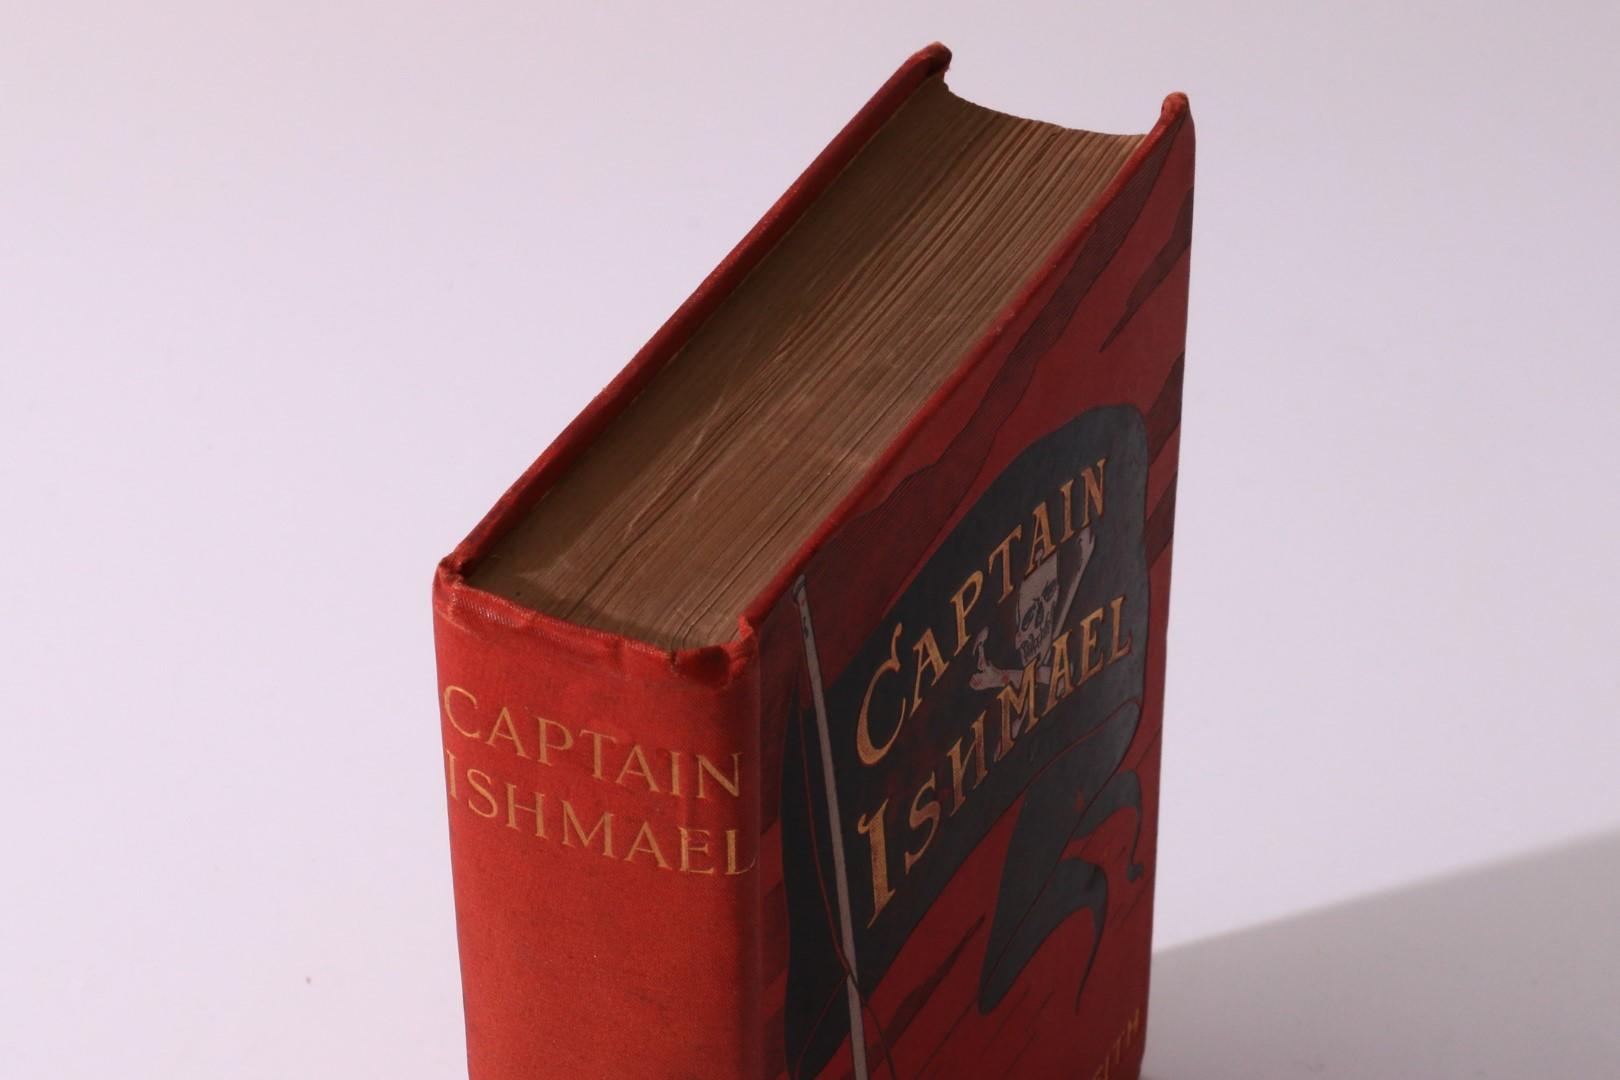 George Griffith - Captain Ishmael - Hutchinson, 1901, First Edition.